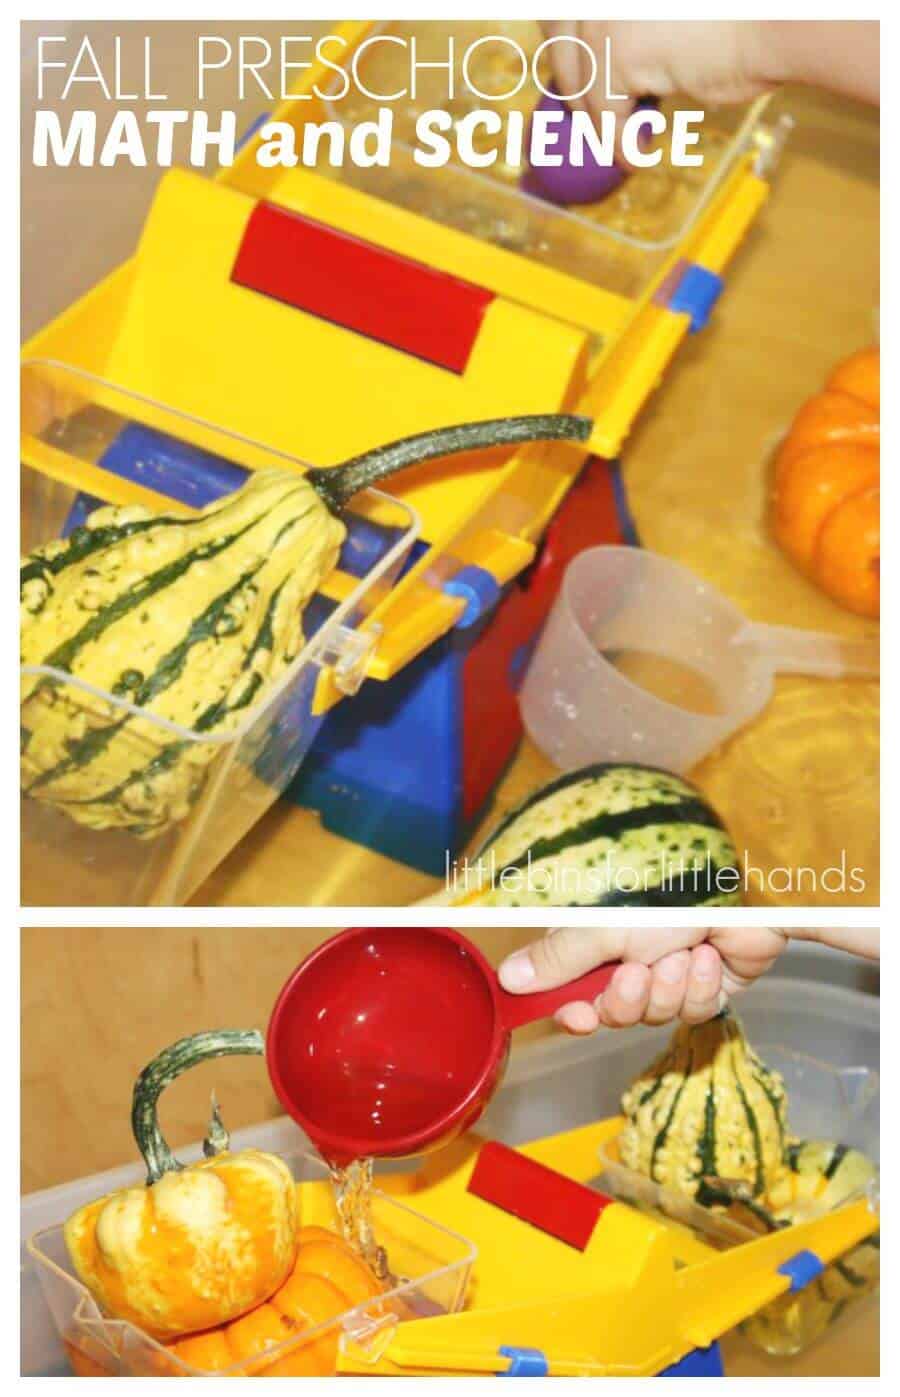 Water Sensory Science Activities for Kids Early Learning Play